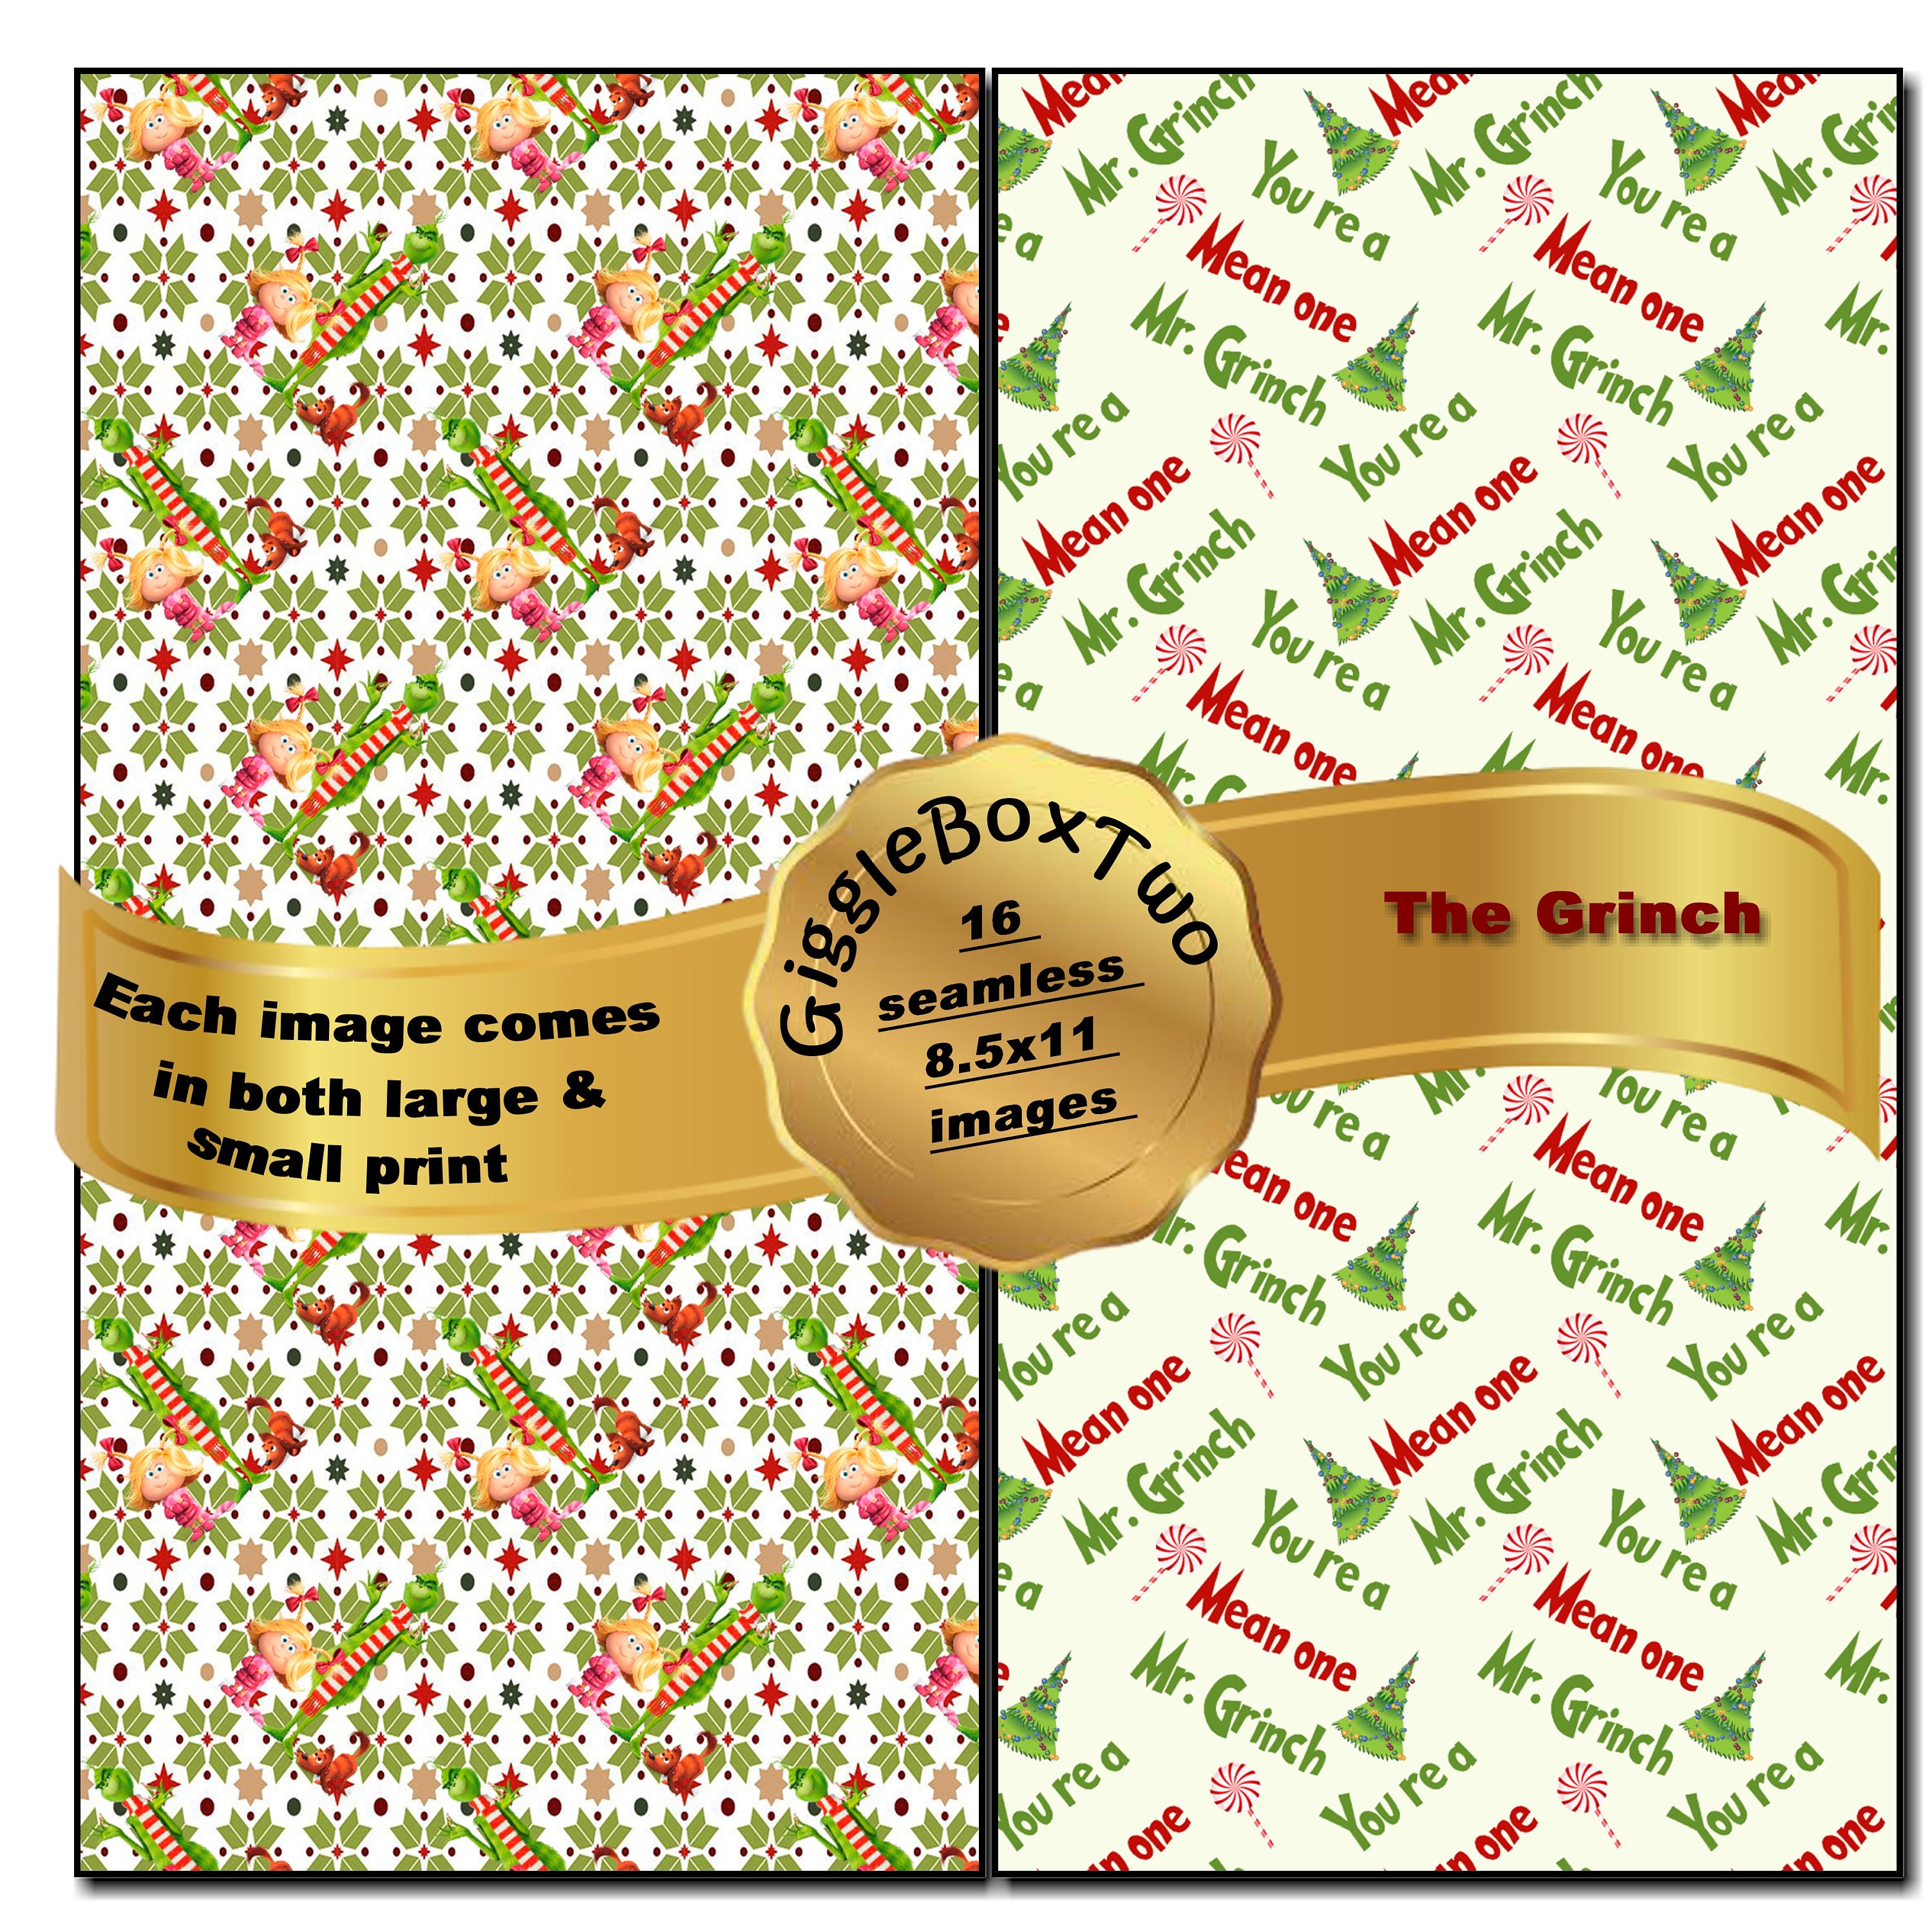 How the Grinch Stole Christmas Seamless Party Printable, Stationary,  Digital Paper, Scrapbook Paper, 8.5 X 11 Paper, Giggleboxdesignshop 